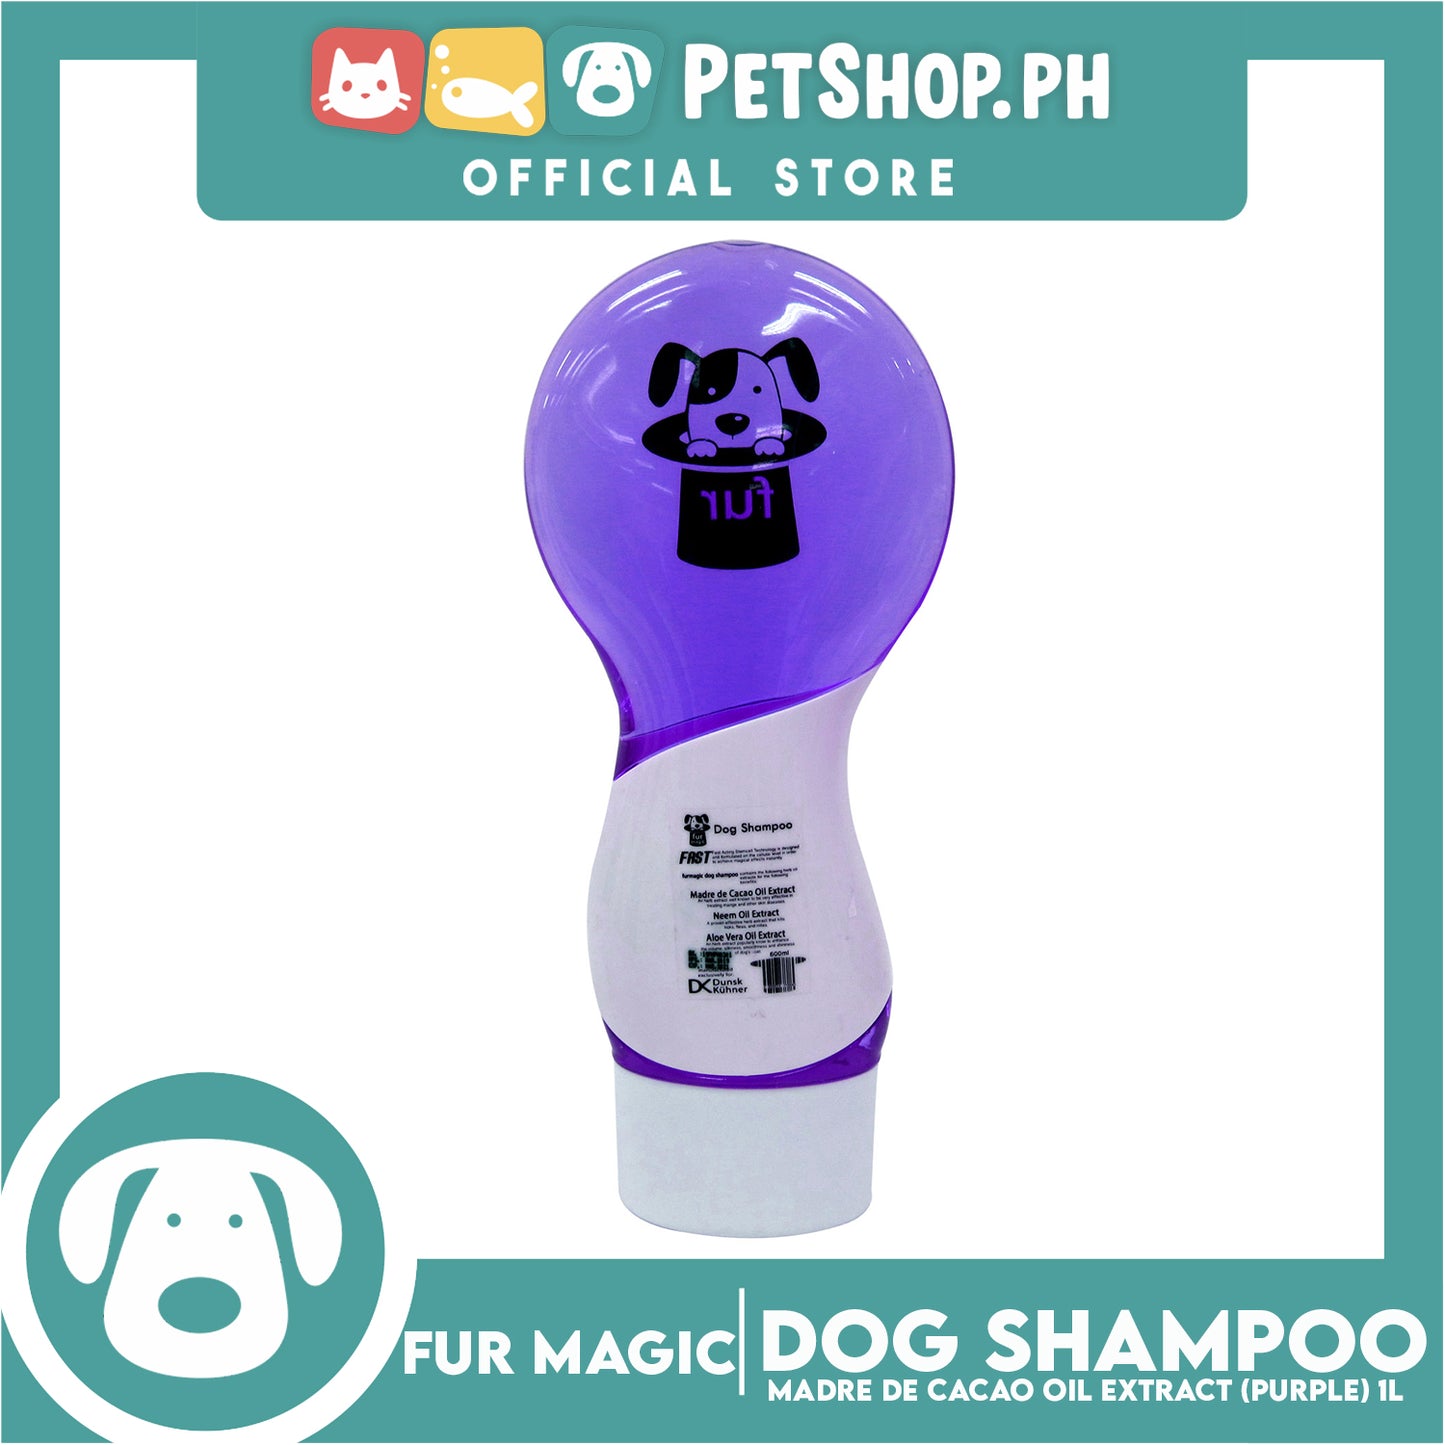 Fur magic with Fast Acting Stemcell Technology (Violet) 1000ml Dog Shampoo